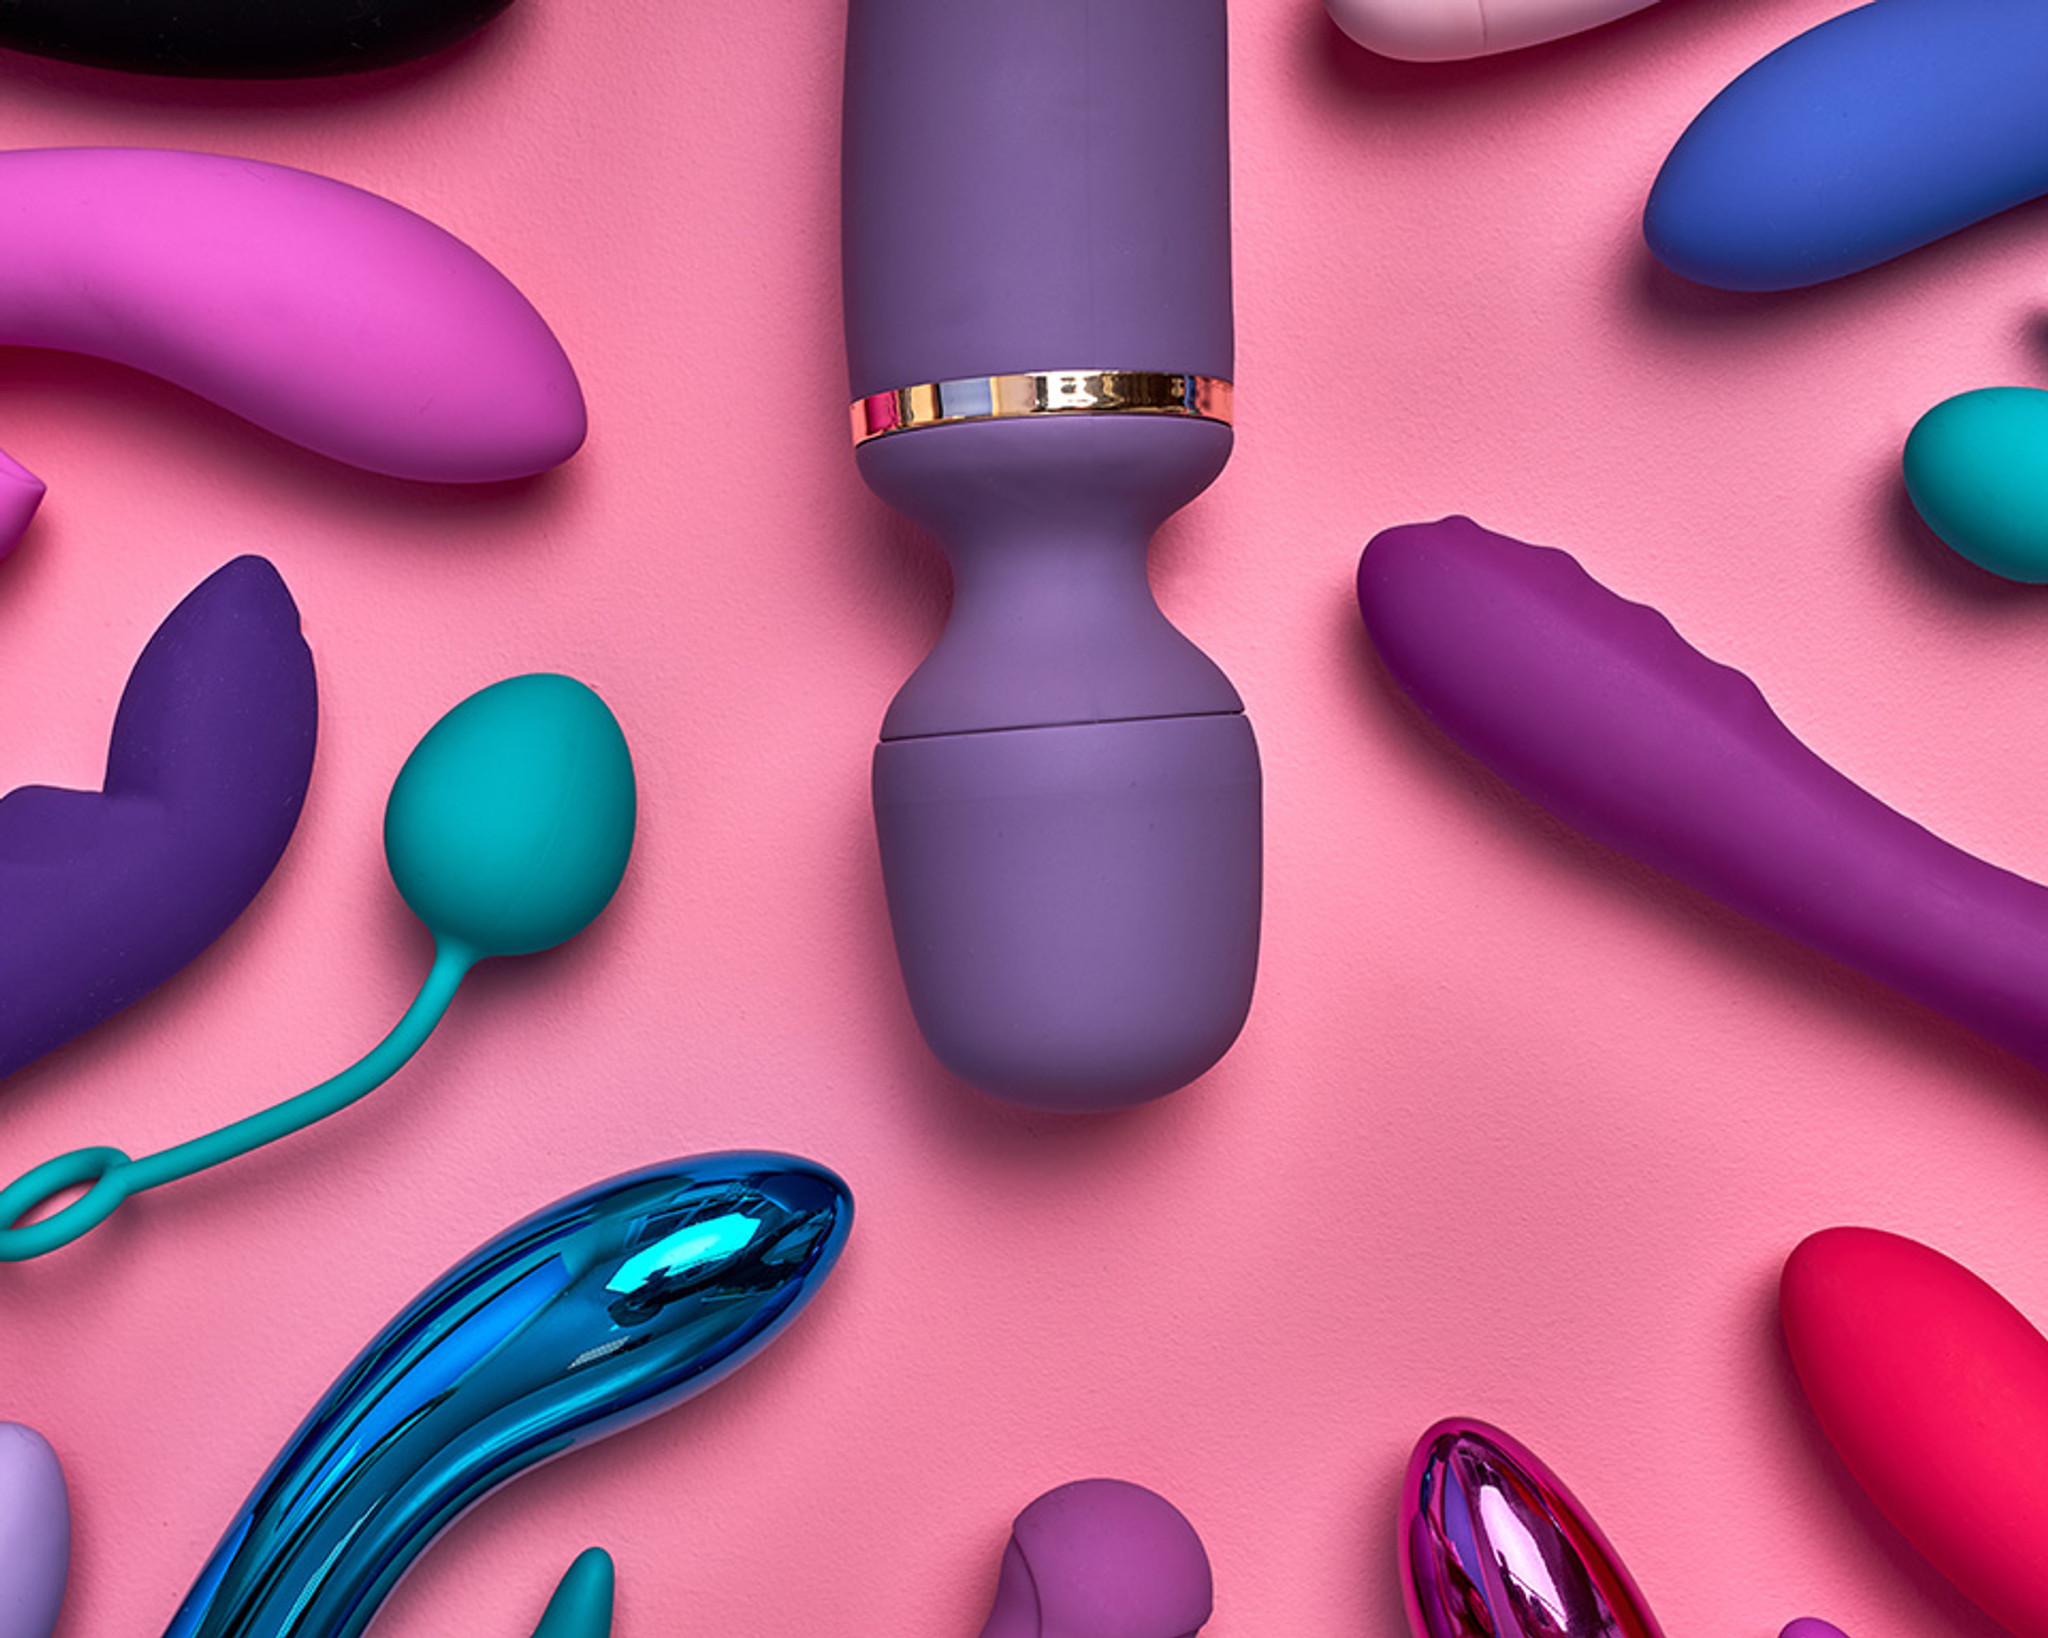 The Beginner’s Guide to Buying Female Sex Toys from an Adult Store